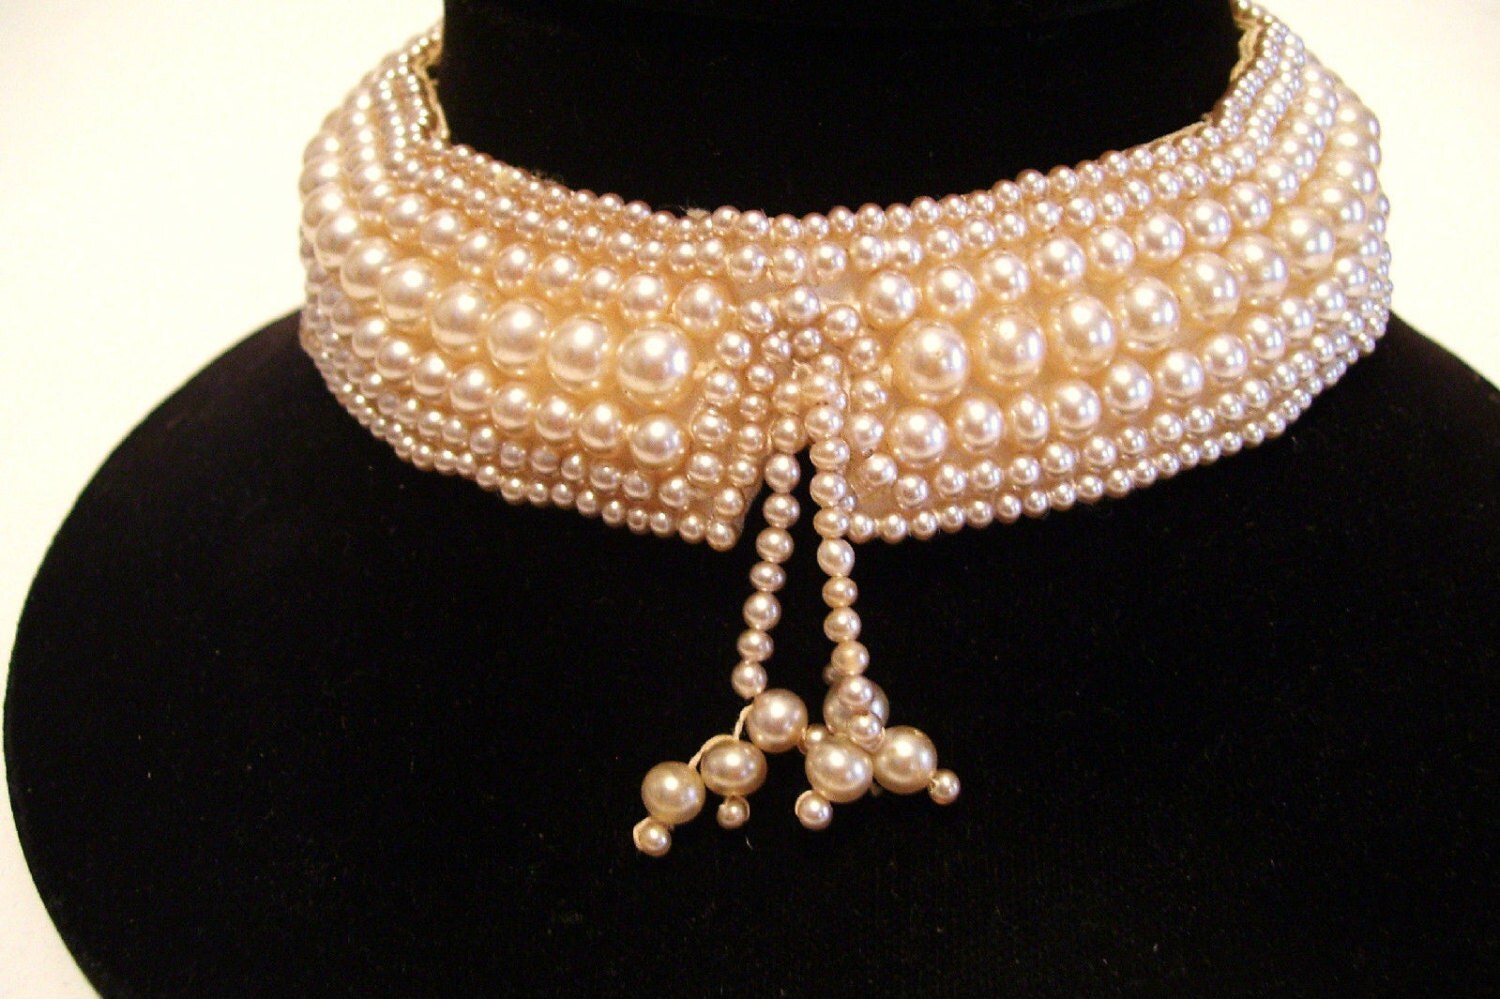 Vintage 1940s Faux Pearl Choker Necklace Japan Hand Made